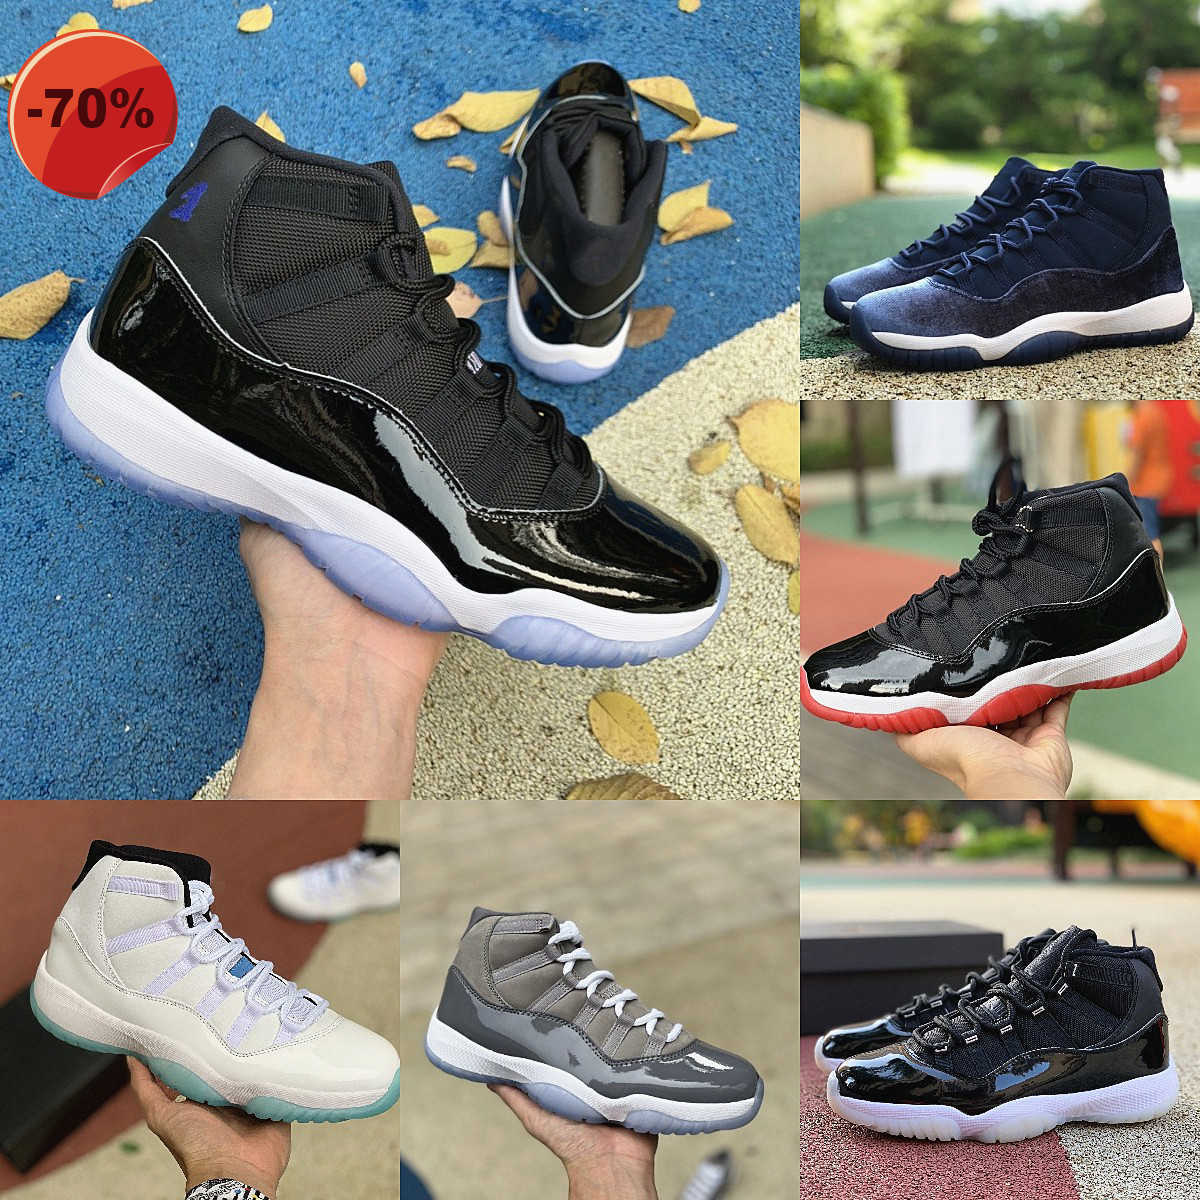 

Sandals With Box 2023 Jubilee 11 11s High Basketball Shoes Jumpman Men Women COOL GREY Midnight Navy Playoffs Bred Space Jam Legend Gamma Blue Concord 45 Low Columbia